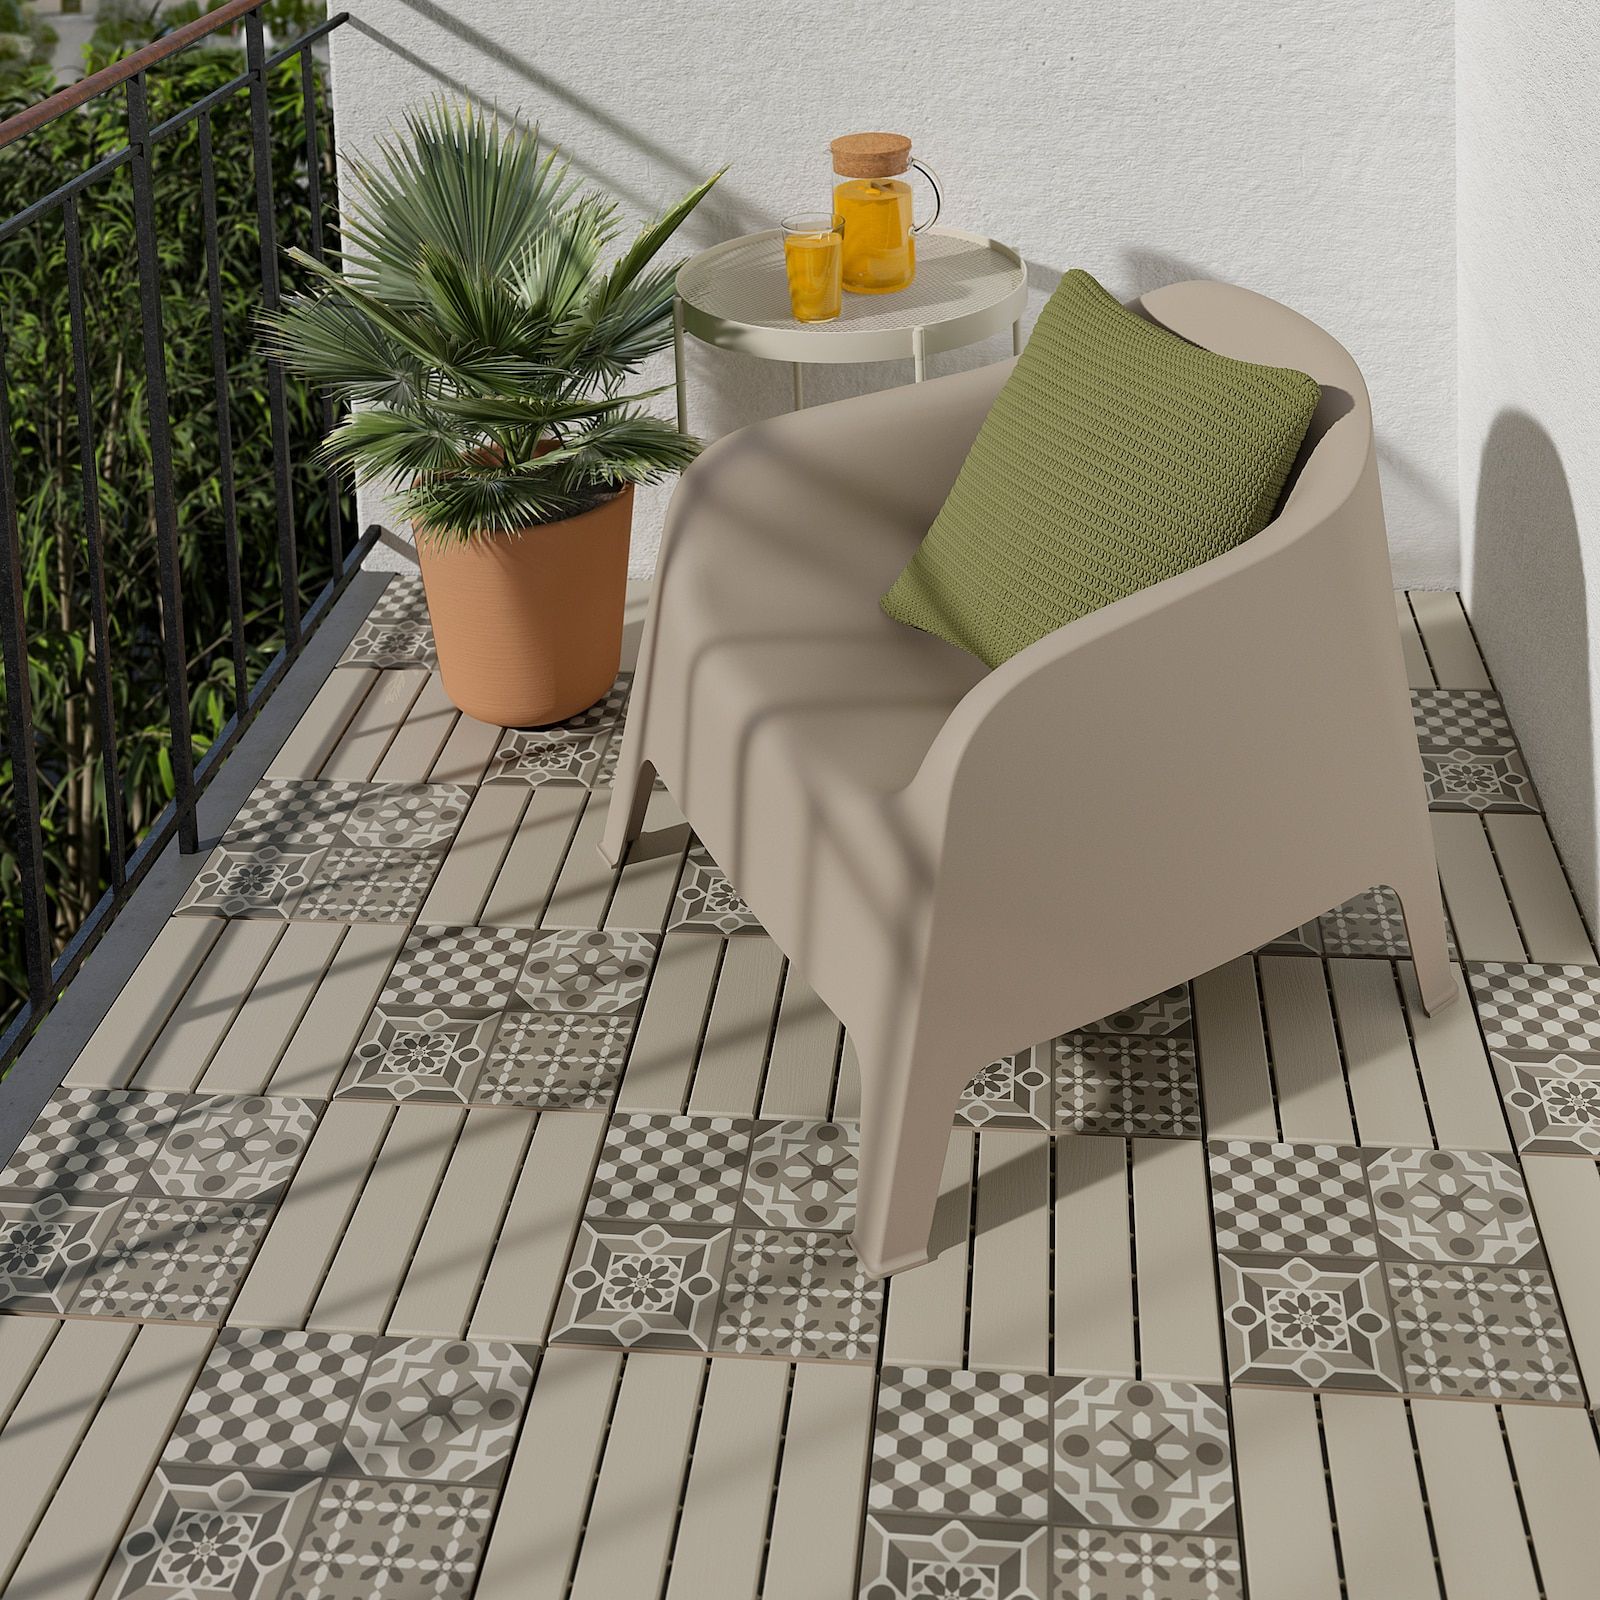 The Ultimate Guide to Choosing and Installing Deck Flooring